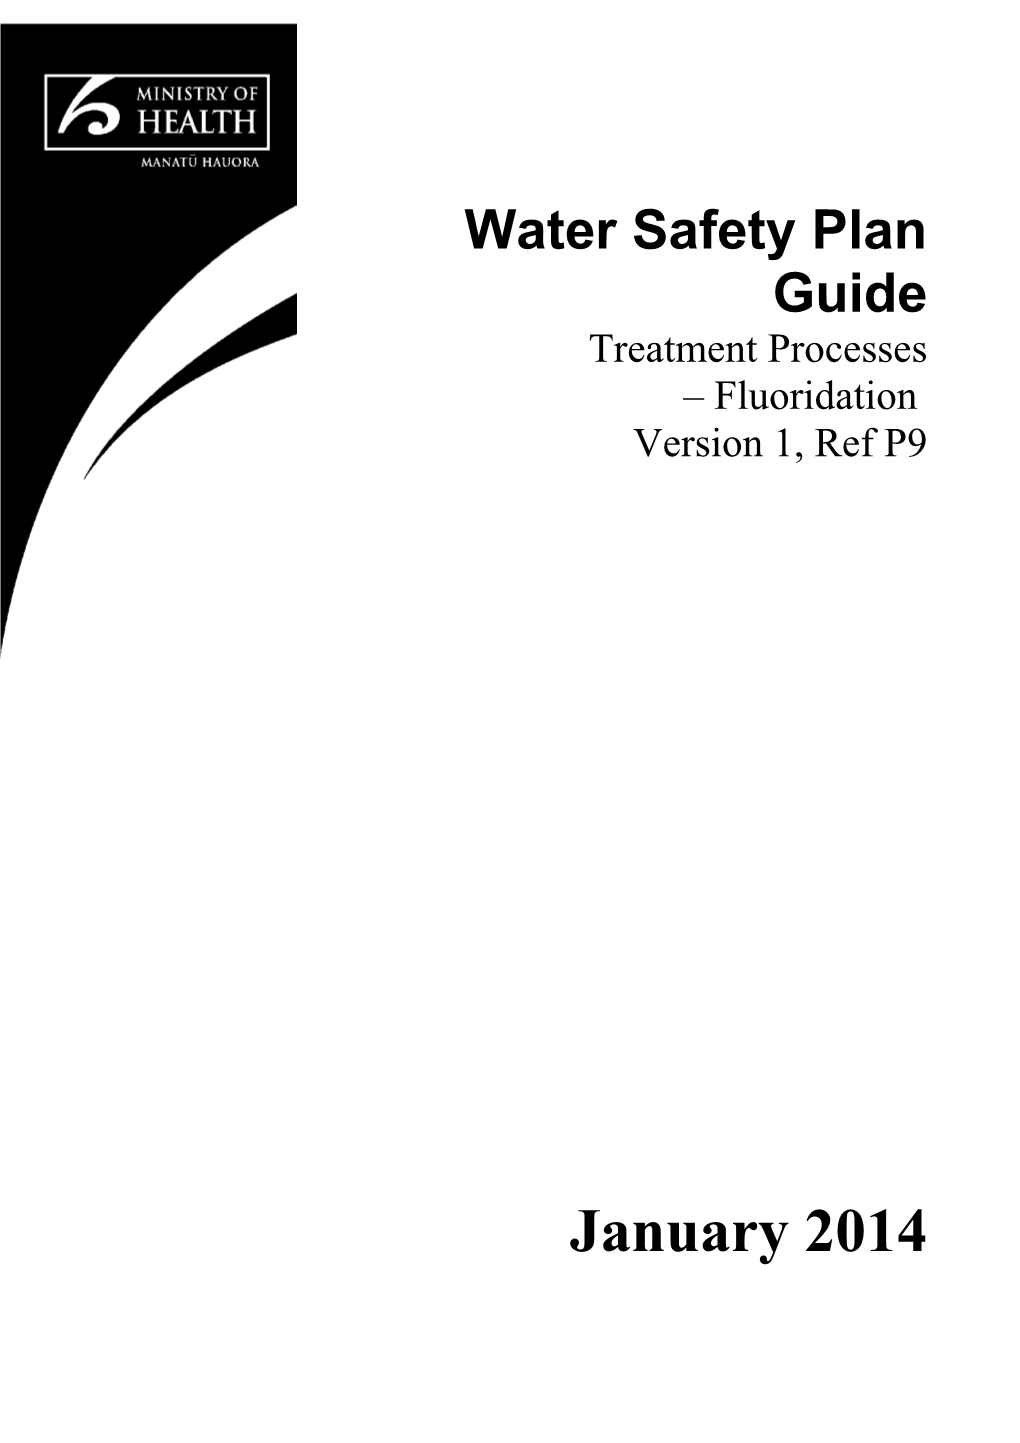 Water Safety Plan Guide: Treatment Processes Fluoridation